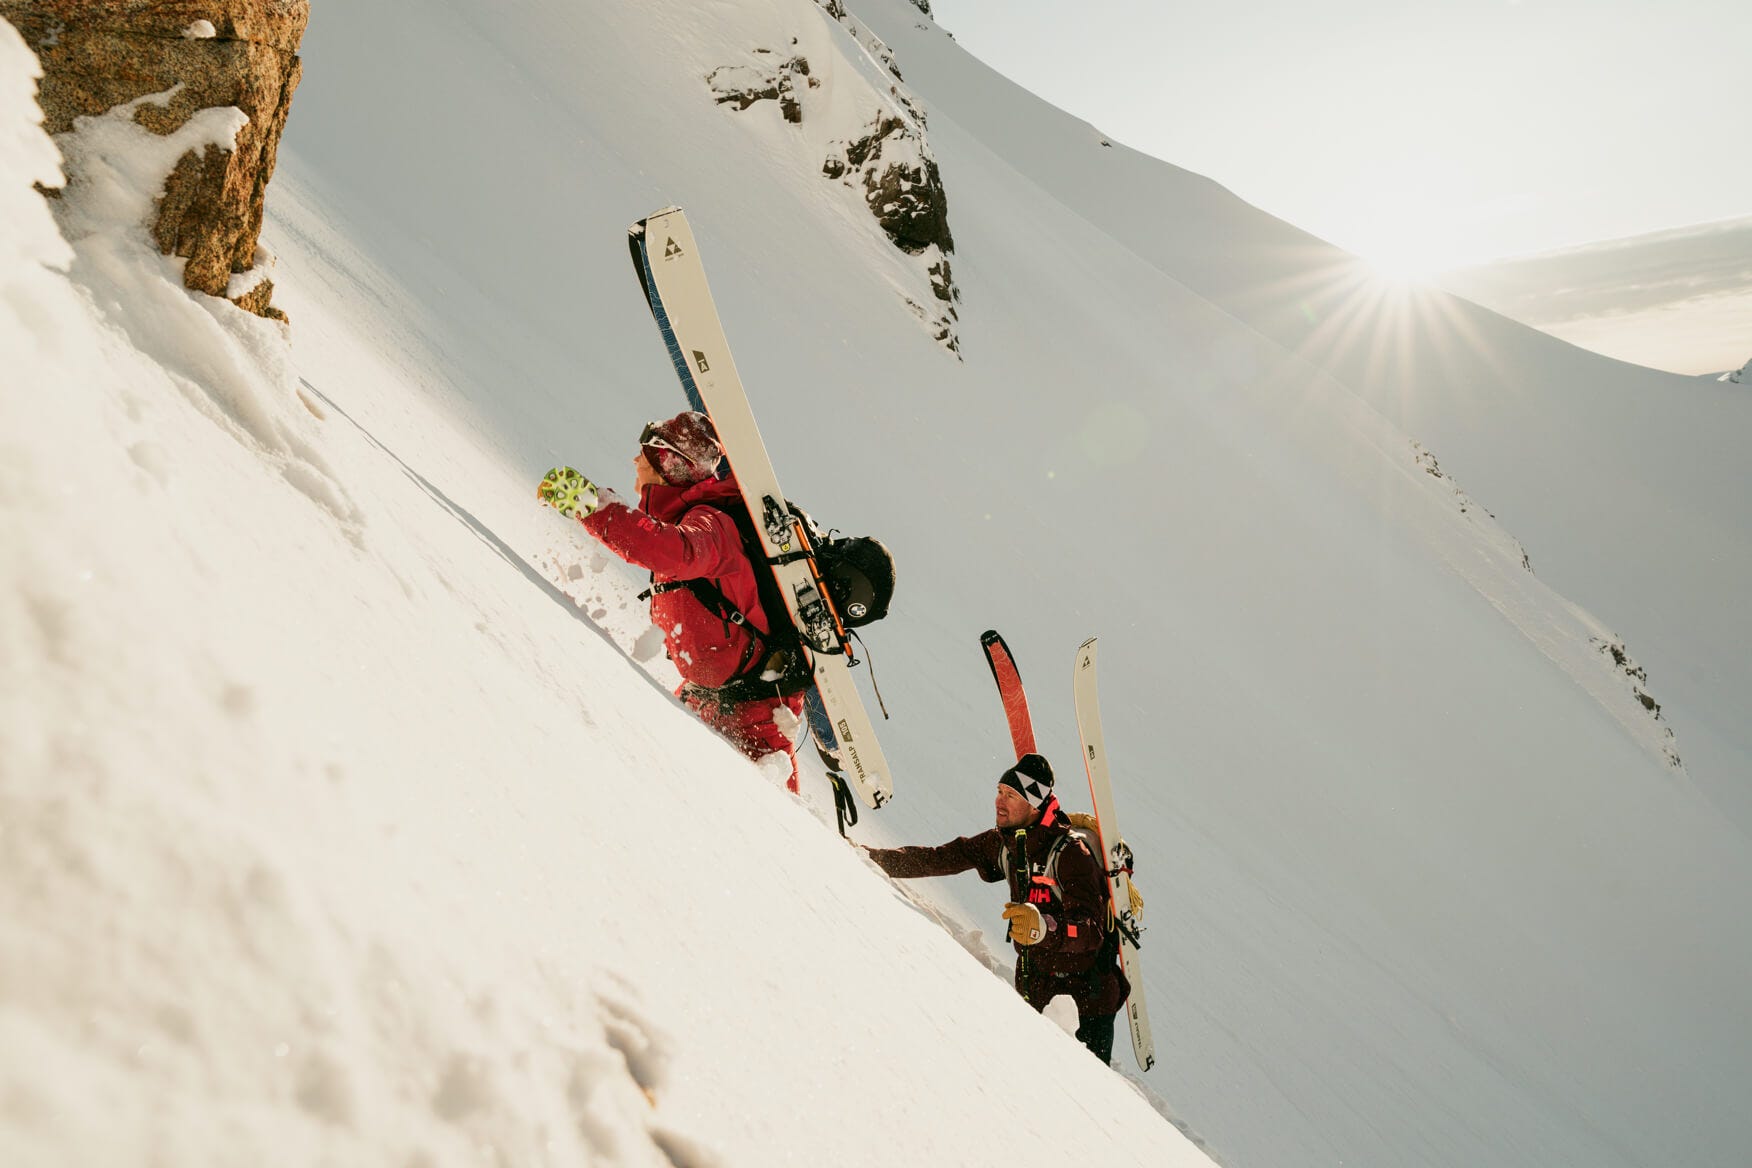 2 people scaling a mountain with skiis on their back in deep powder snow 